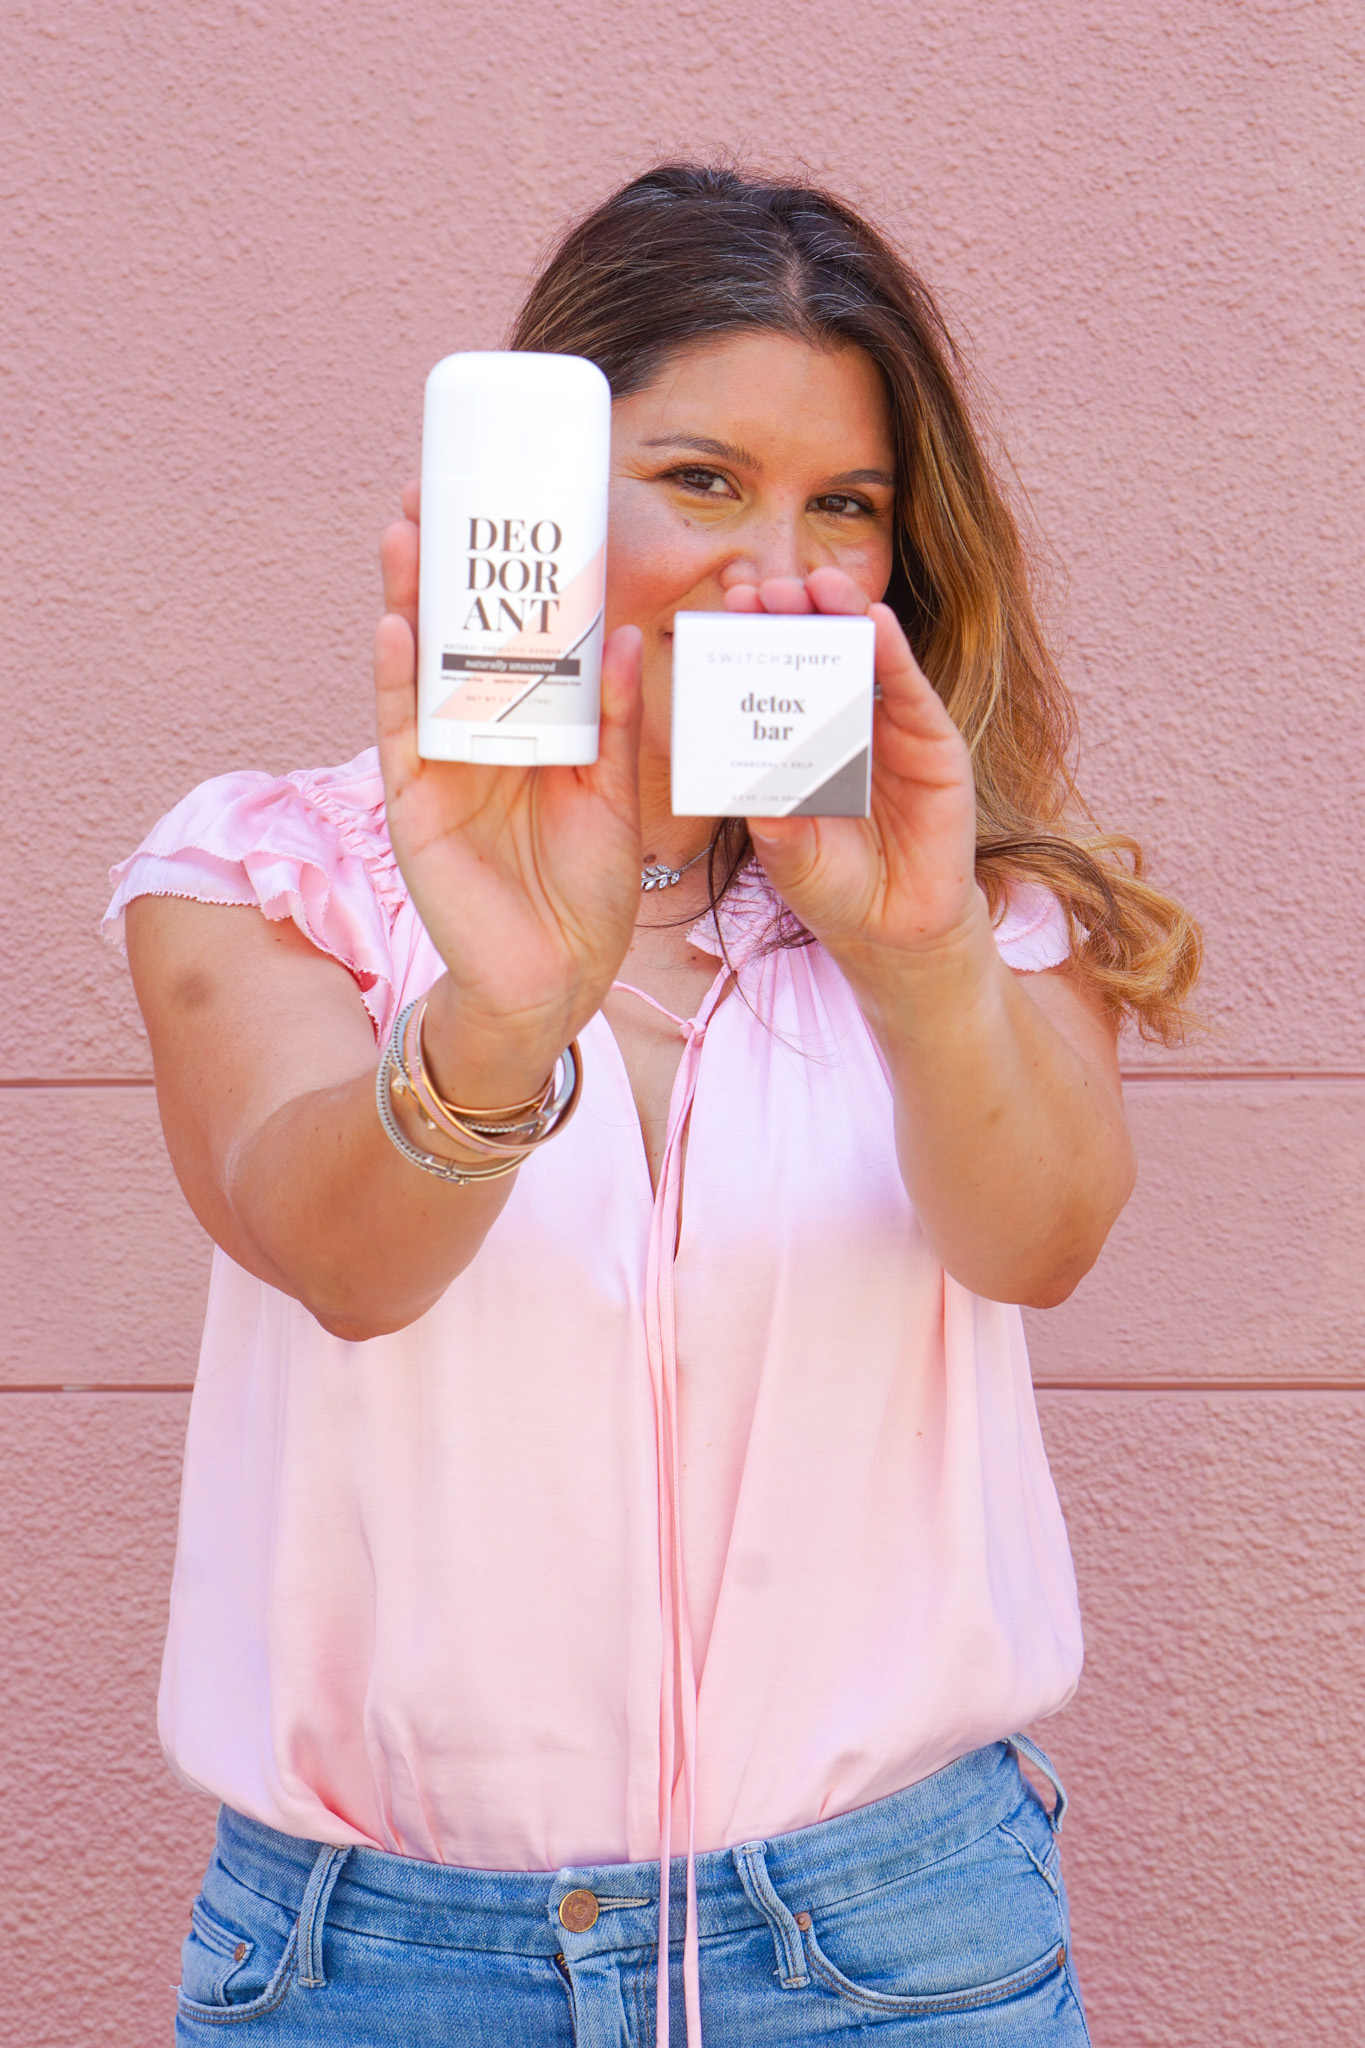 Switch2pure founder Estela Cockrell with clean prebiotic deodorant and detox soap bar